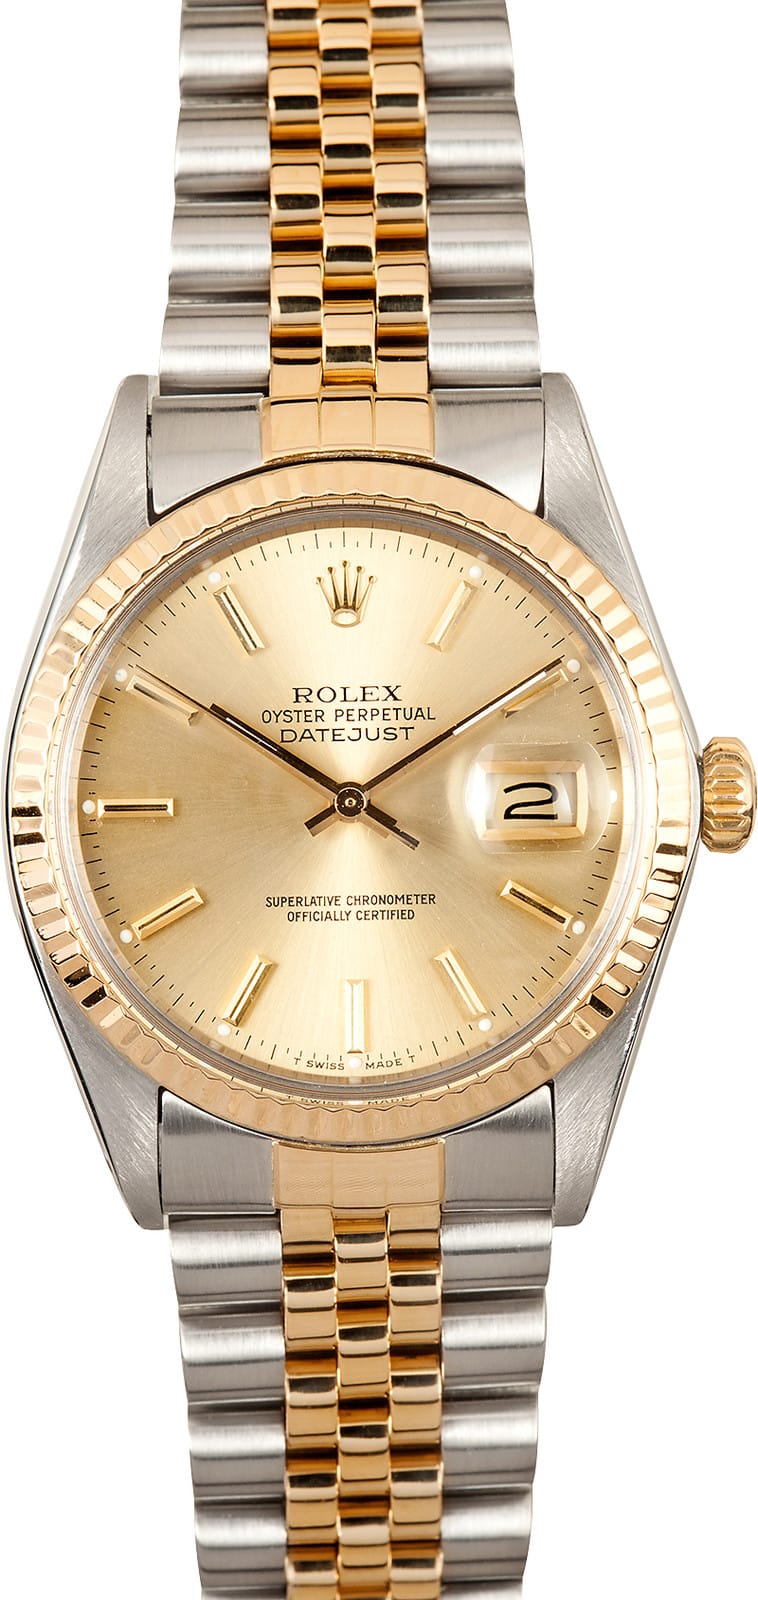 rolex datejust in stainless steel and gold